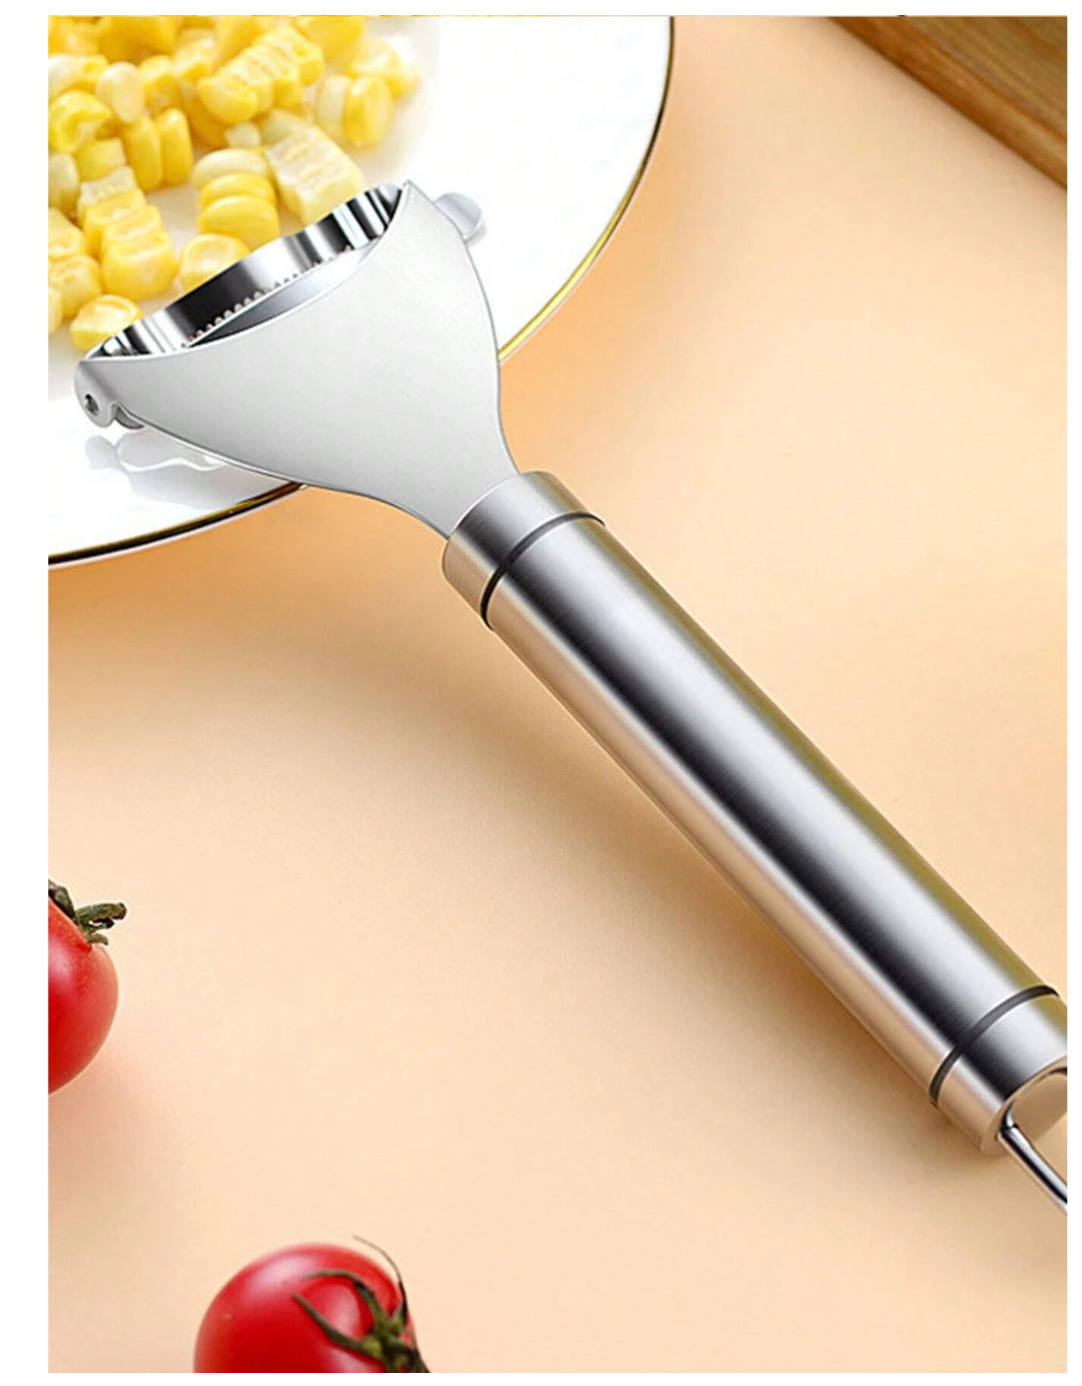 Revolutionize Your Kitchen: Unleash the Power of Precision with Our 1pc Stainless Steel Corn Stripping Tool – The Ultimate Iron Alloy Corn Peeler!